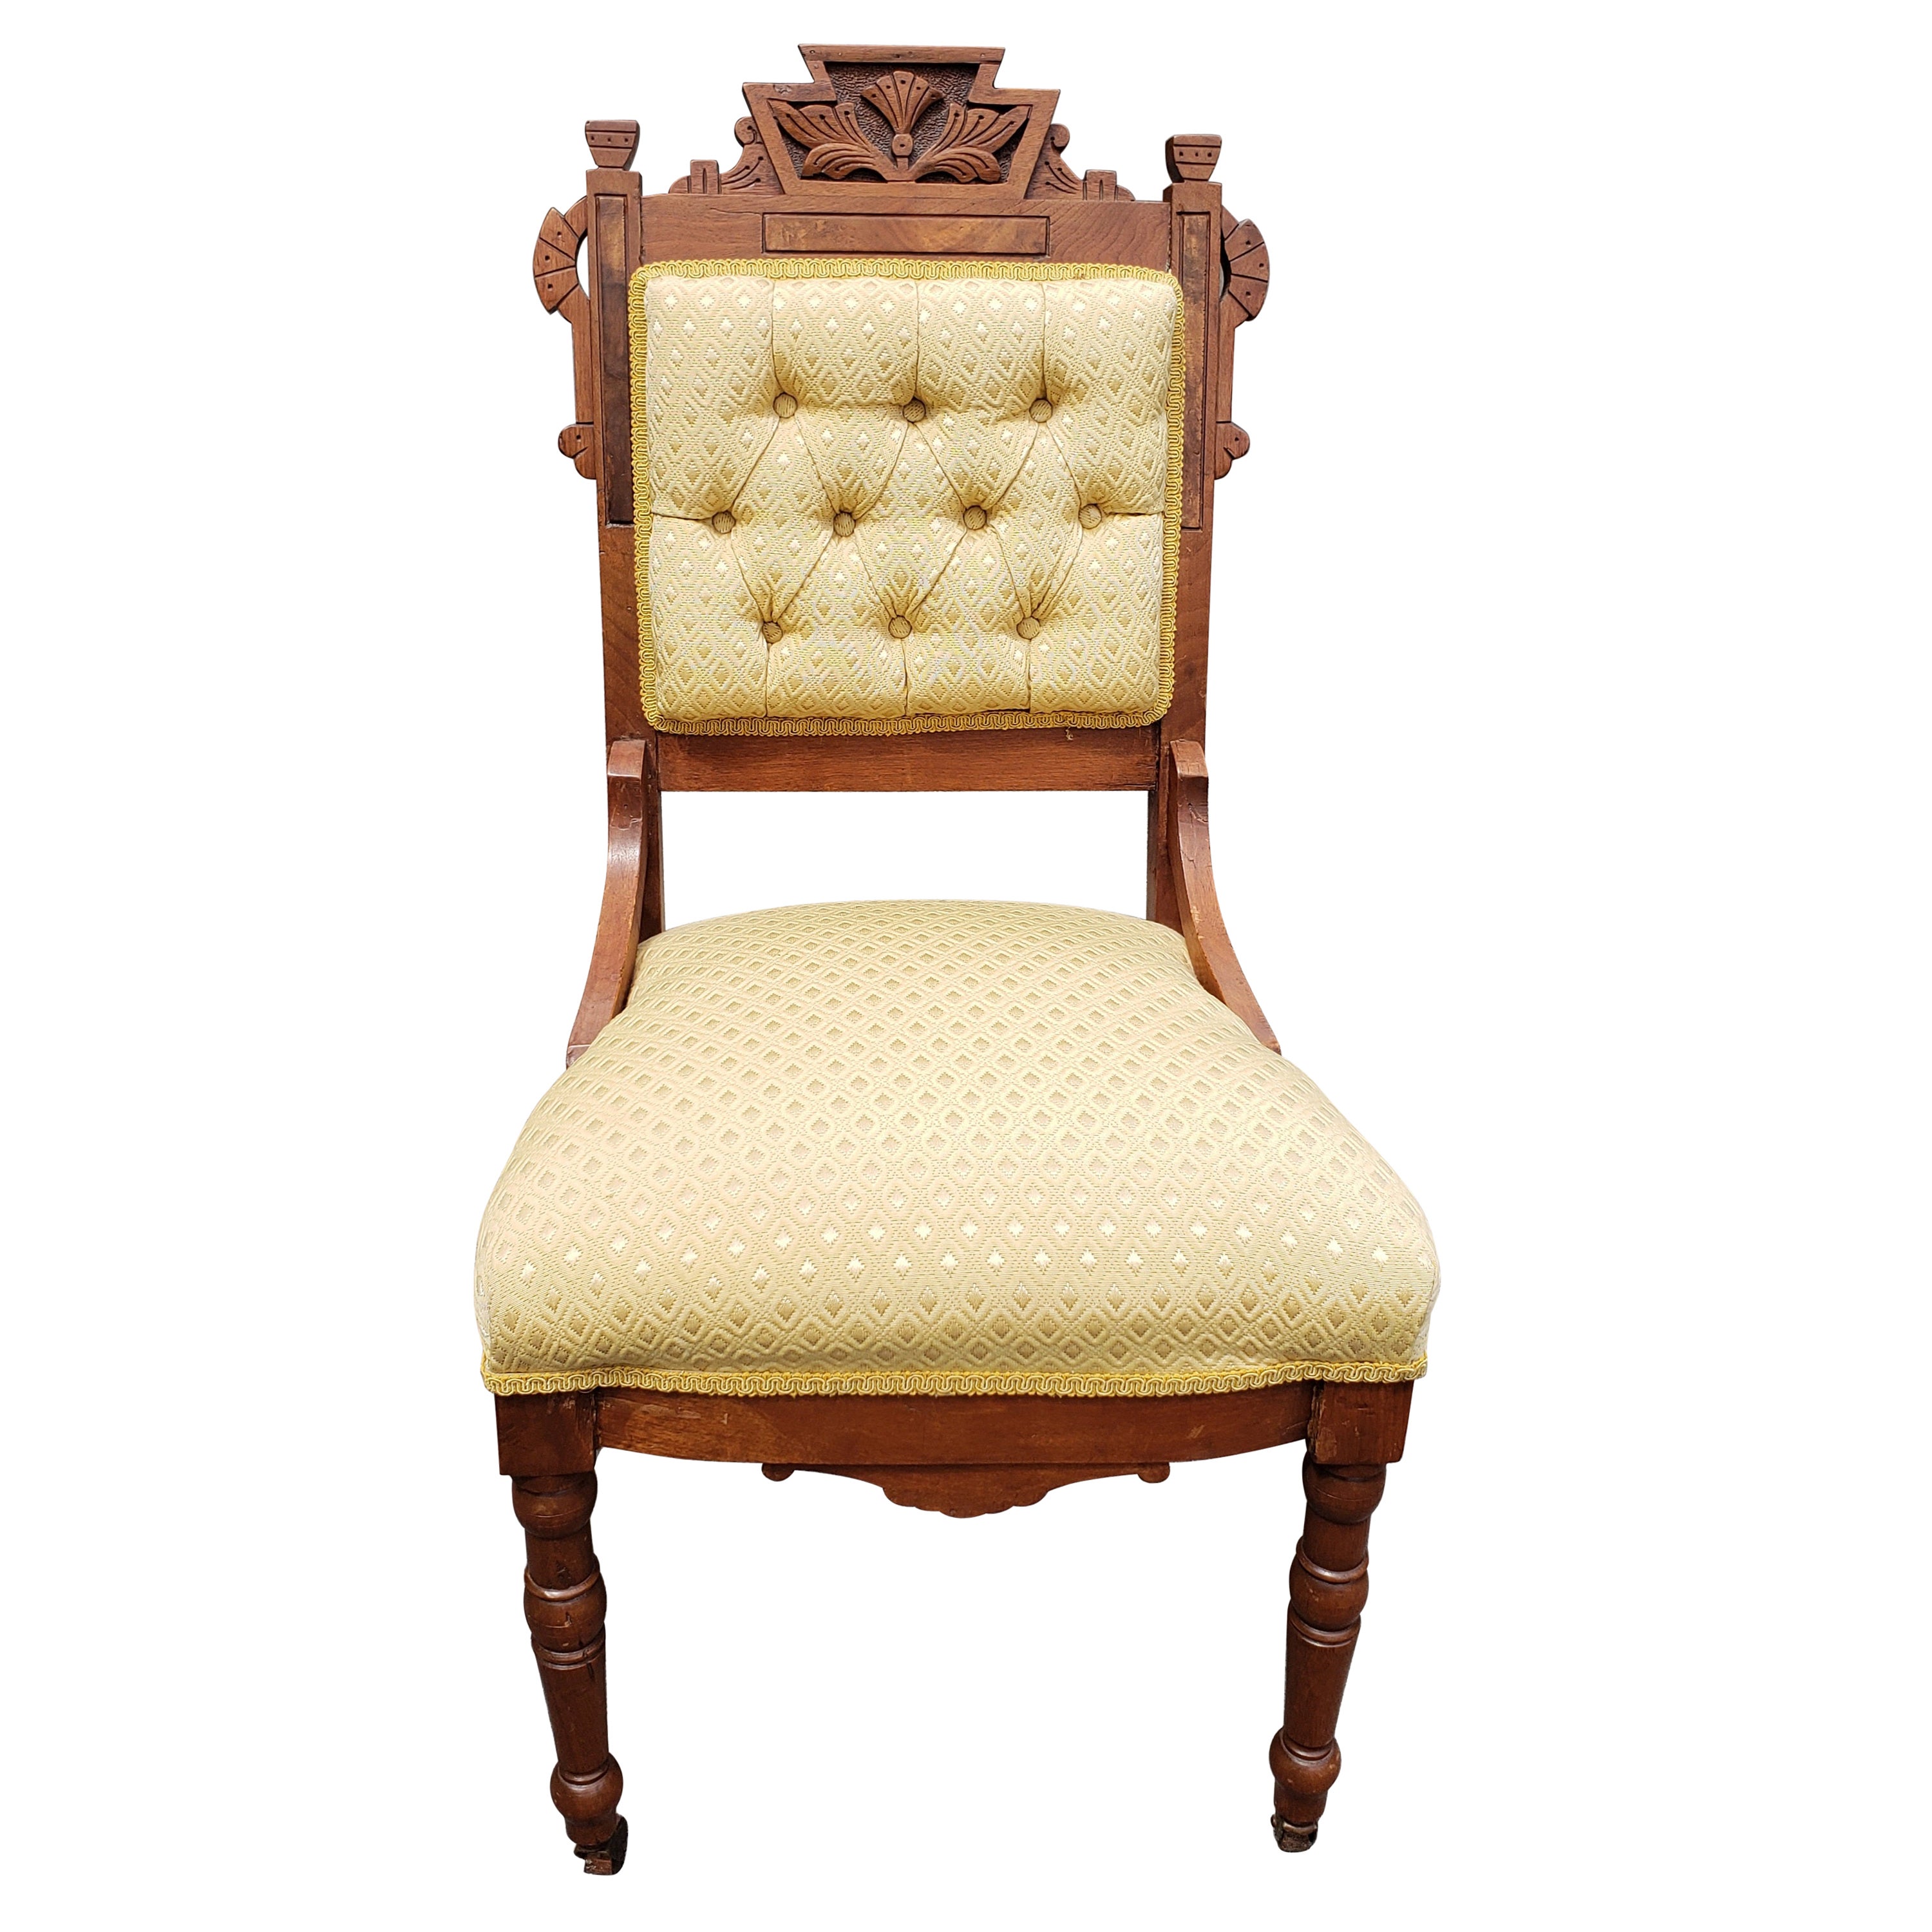 Antique Victorian Walnut Upholstered Tufted Parlor Chair, Circa 1880s For Sale